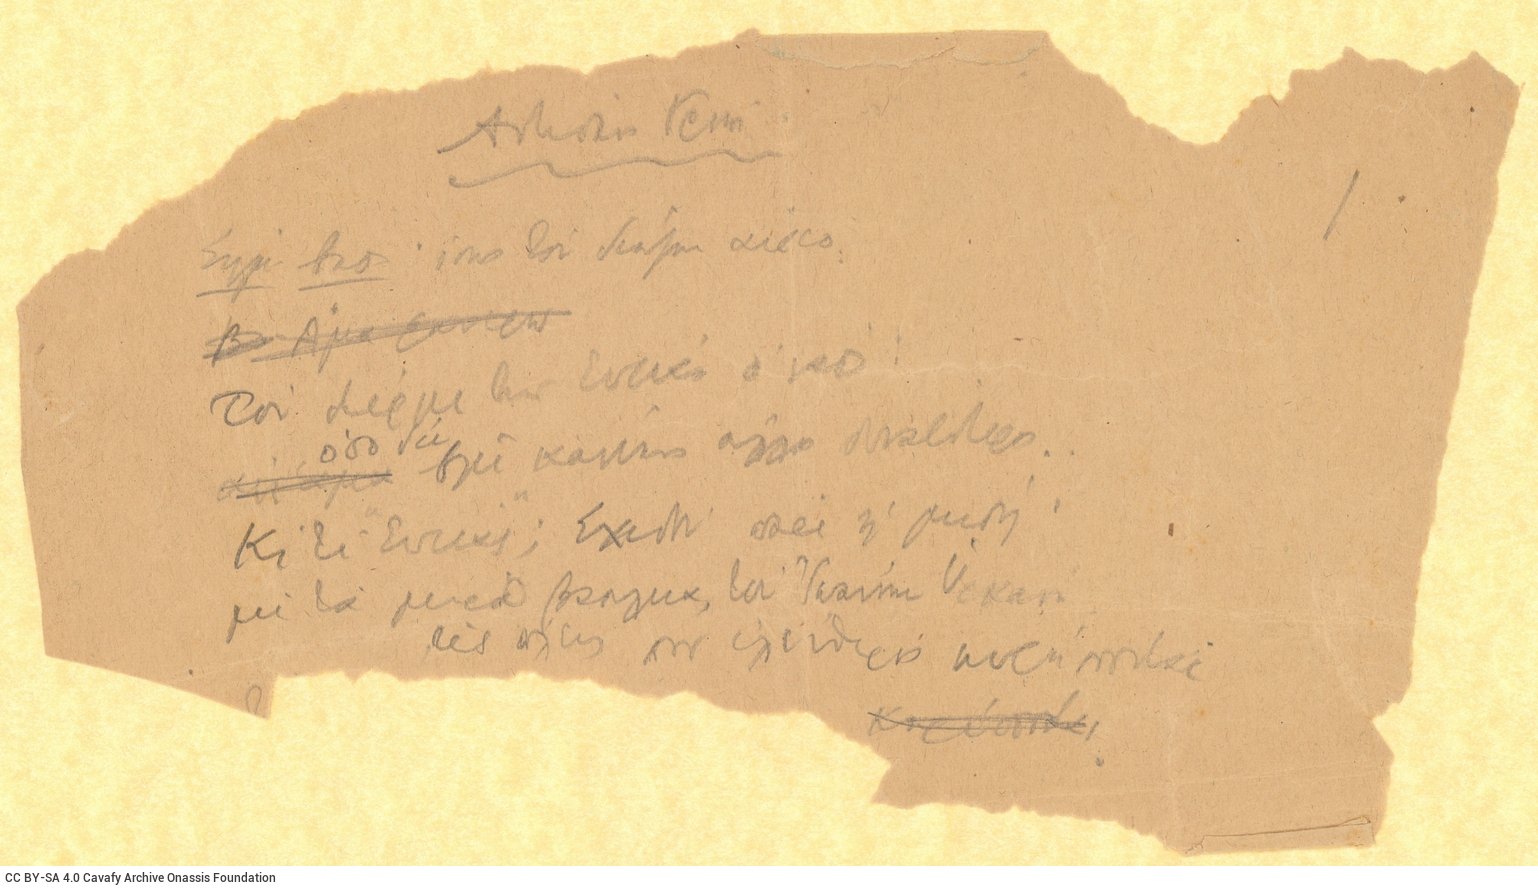 Handwritten draft of the poem "Antiochus the Cyzicene" on one side of two small pieces of paper. Handwritten quote on one 